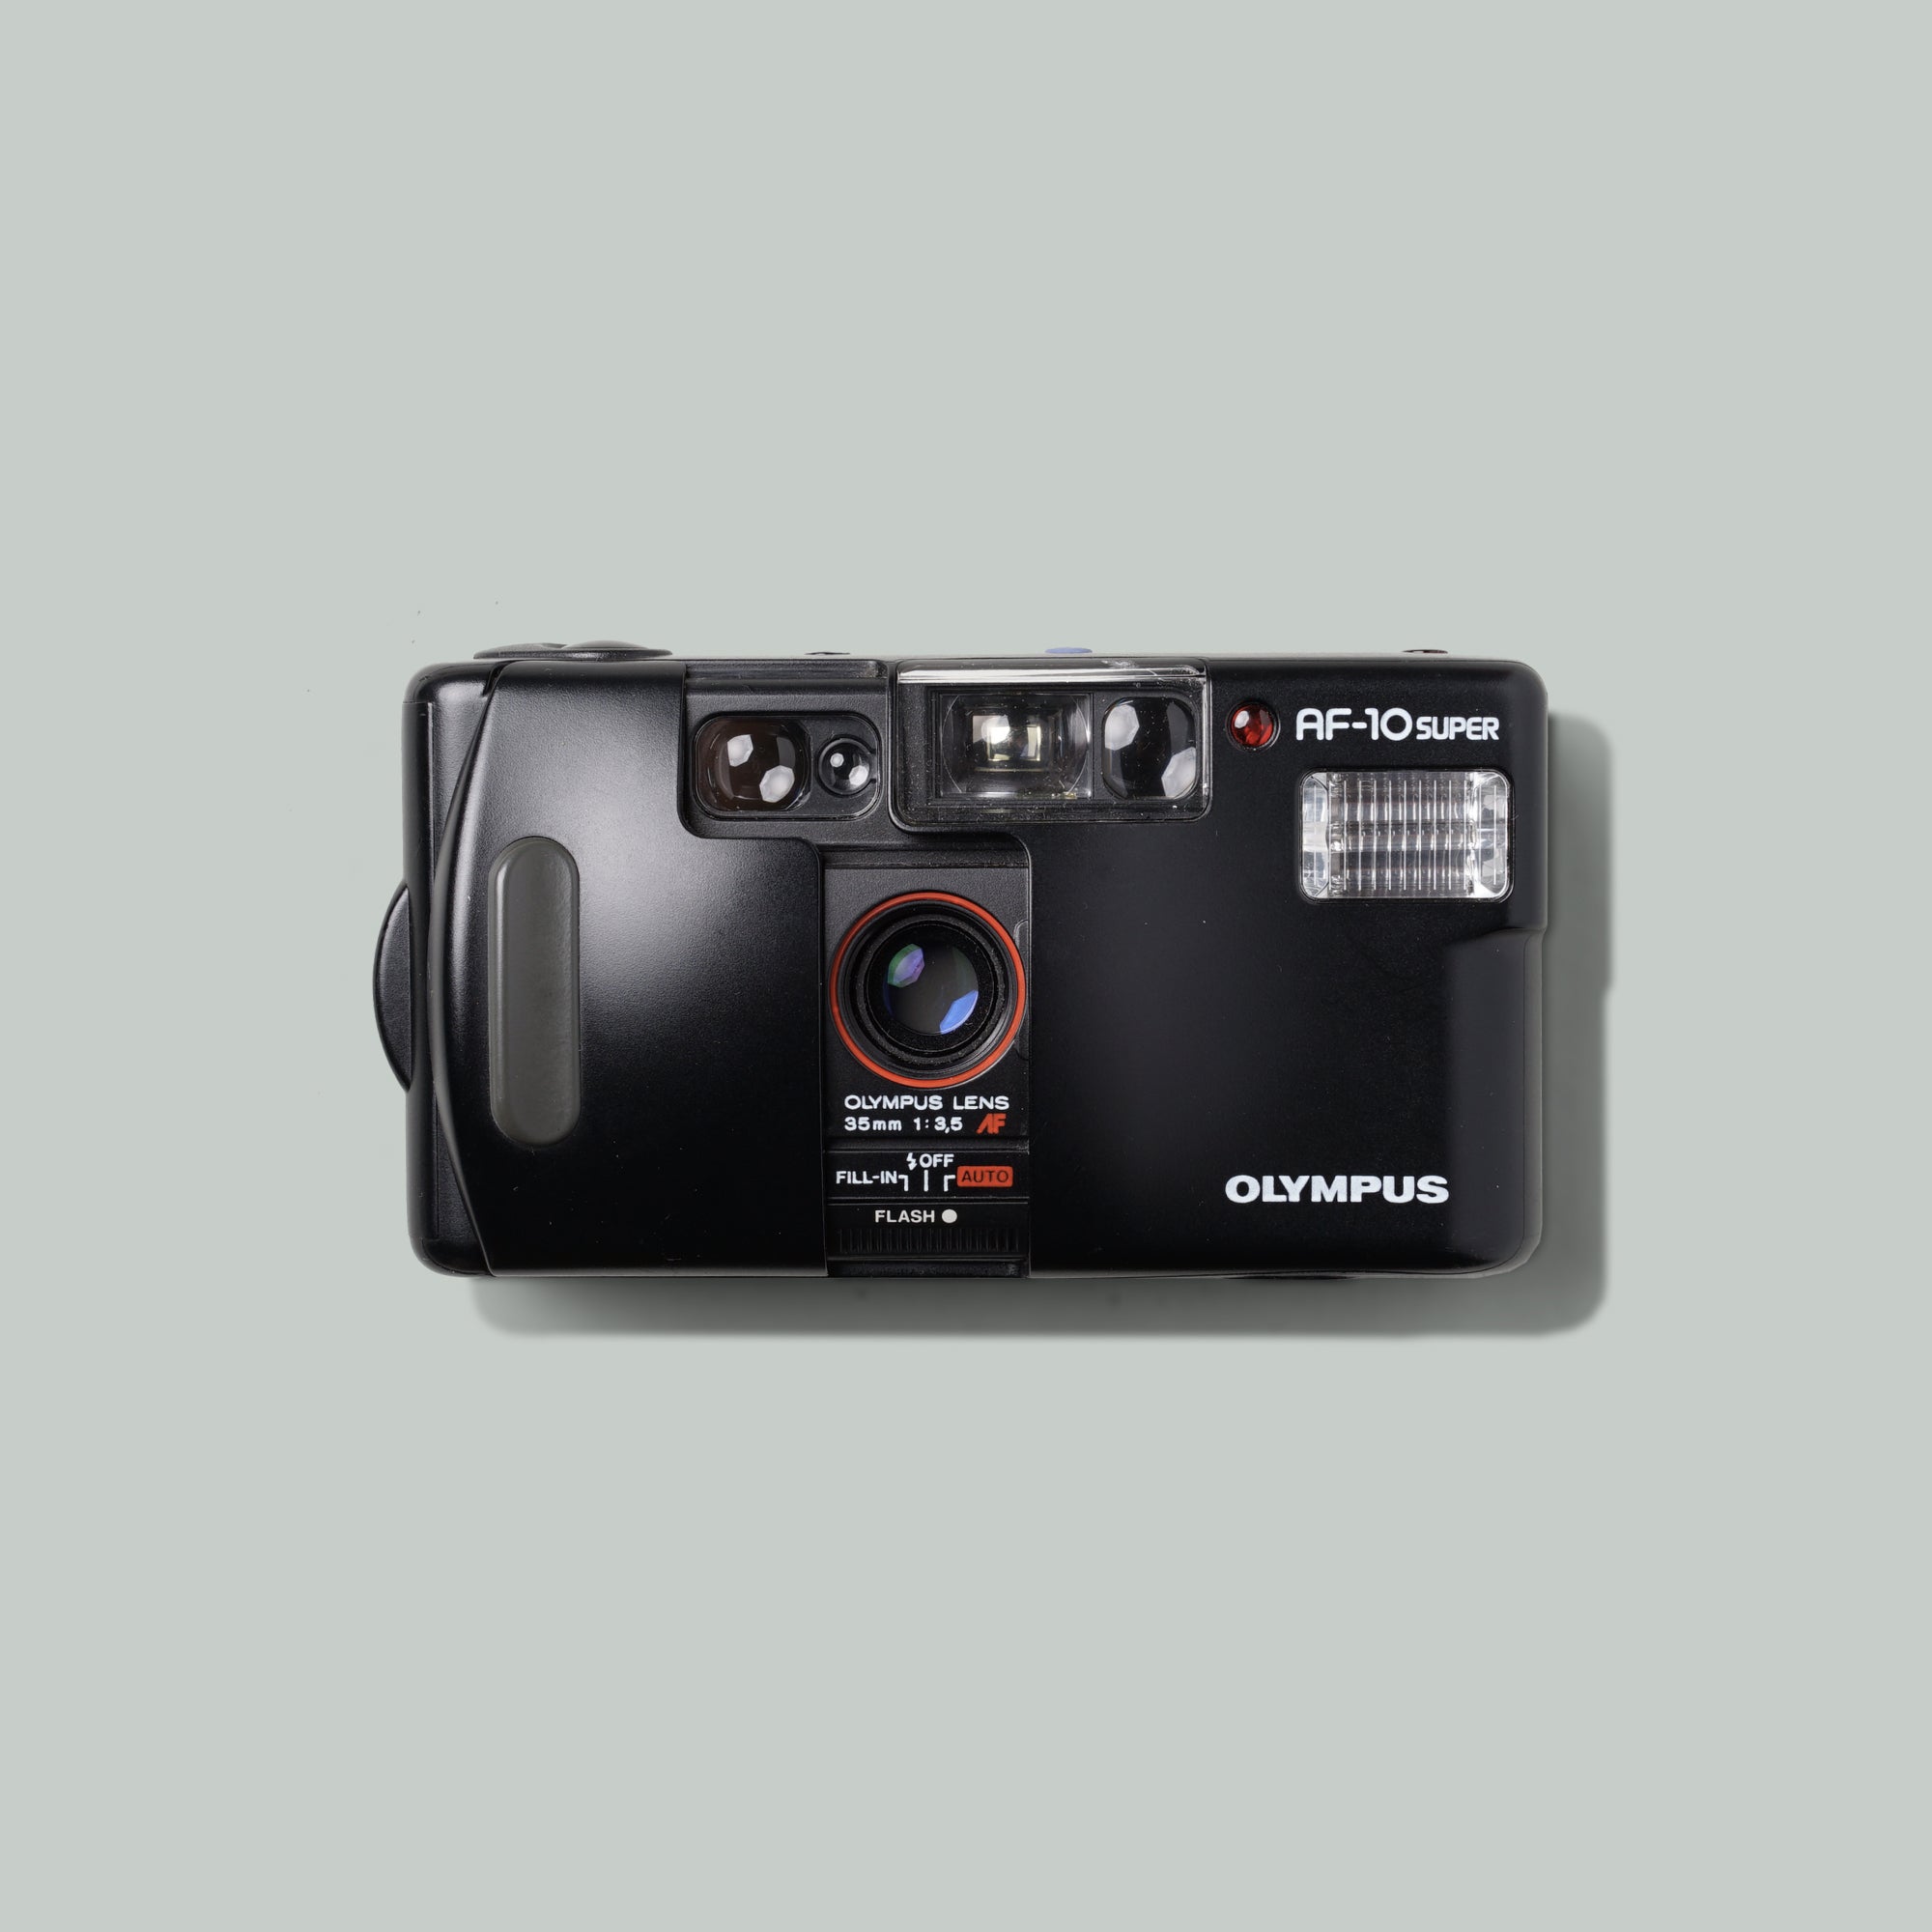 Buy Olympus AF-10 Super now at Analogue Amsterdam